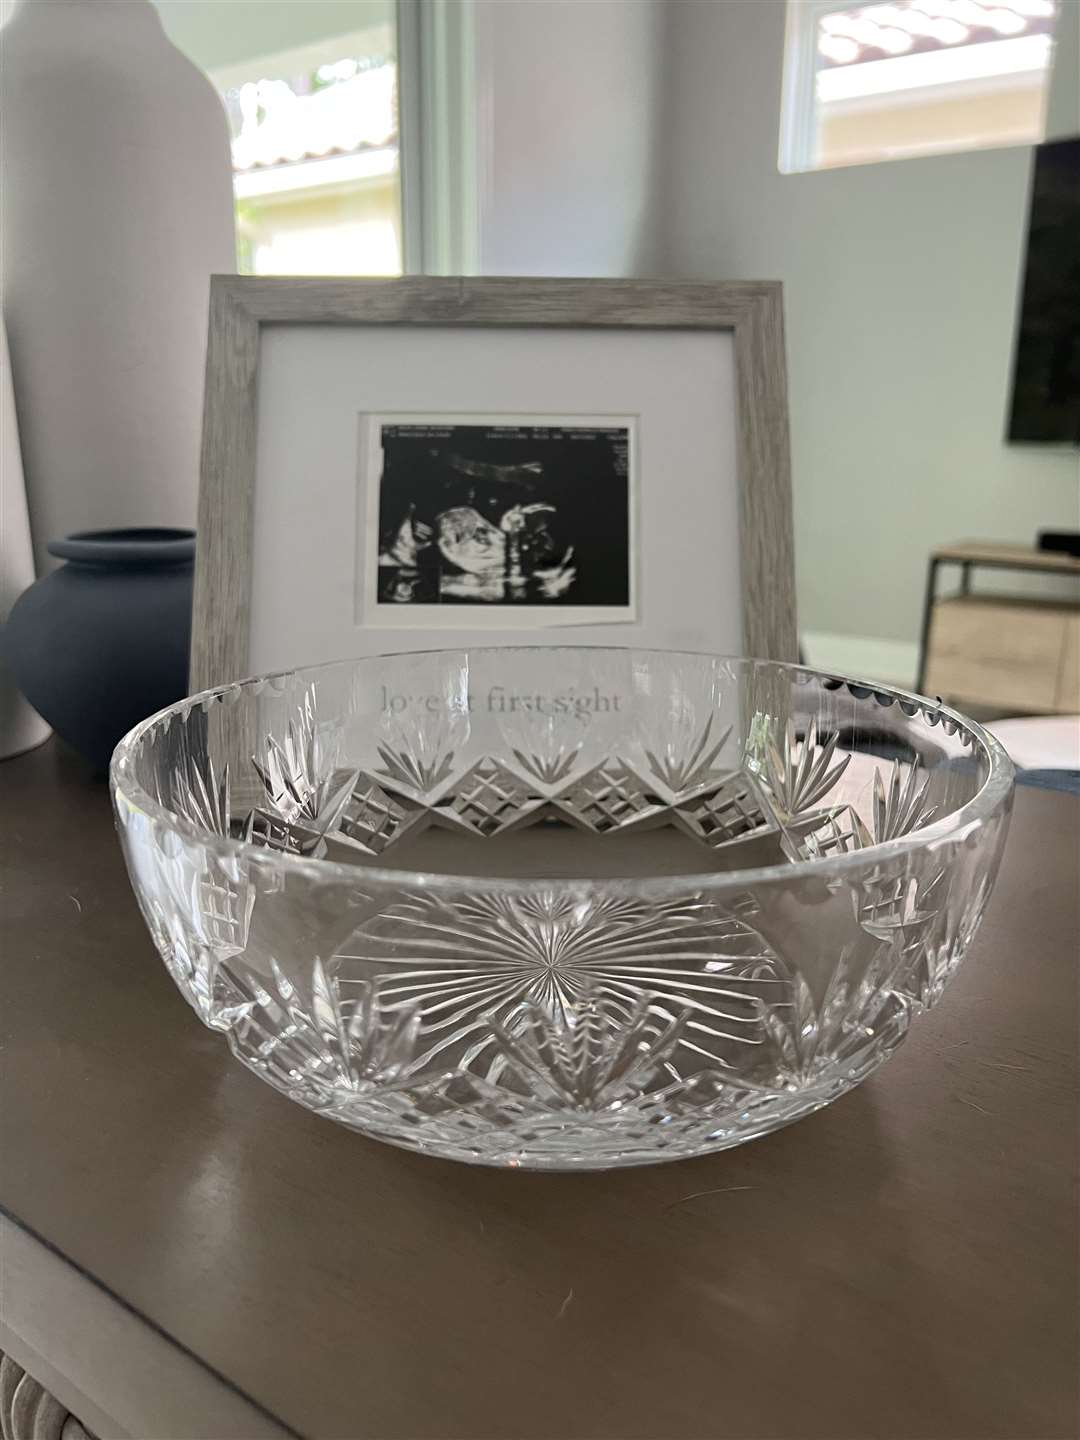 Diane's family has a crystal bowl with connections to the Queen